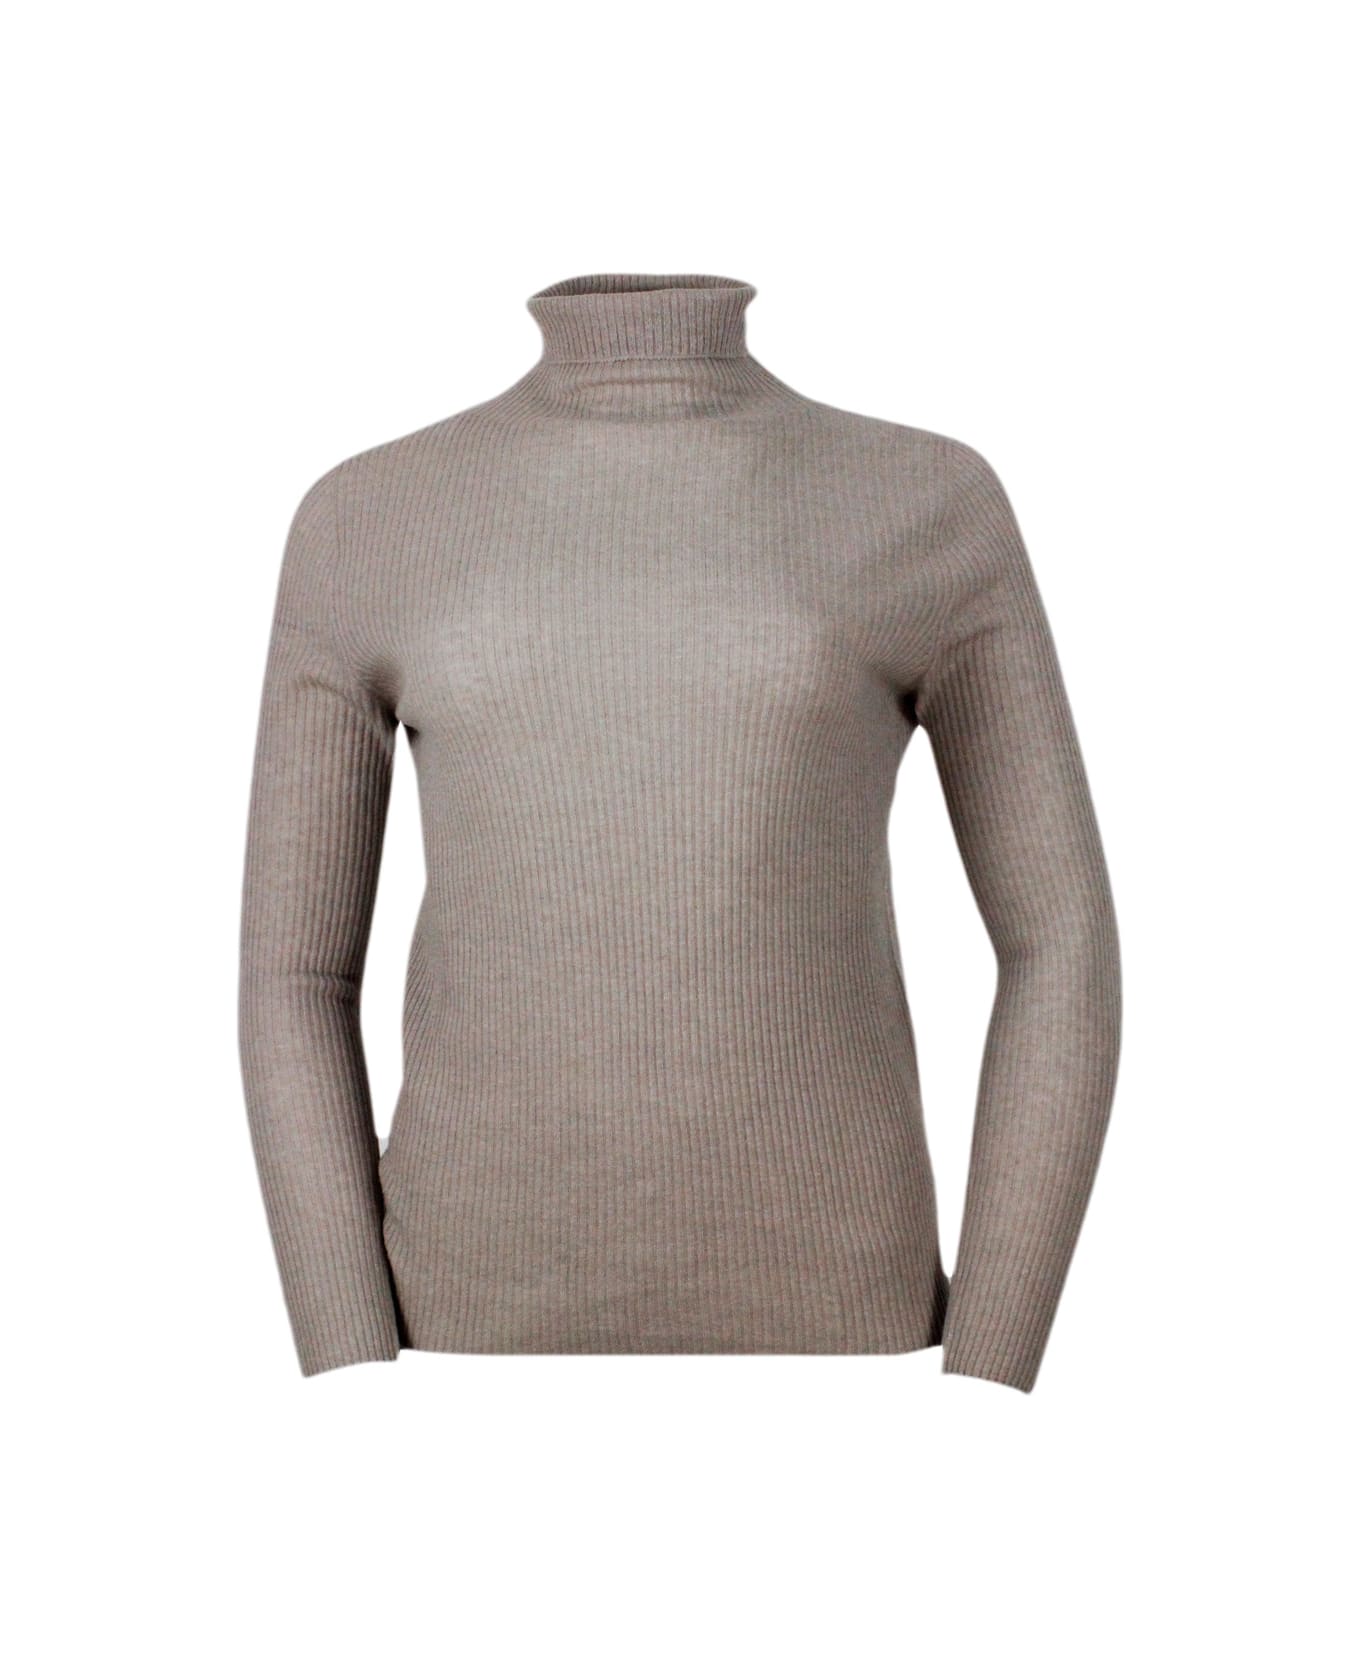 Fabiana Filippi Lightweight Turtleneck Long-sleeved Sweater In Soft And Fine Wool, Silk And Cashmere With Small Rib Knit - Nut